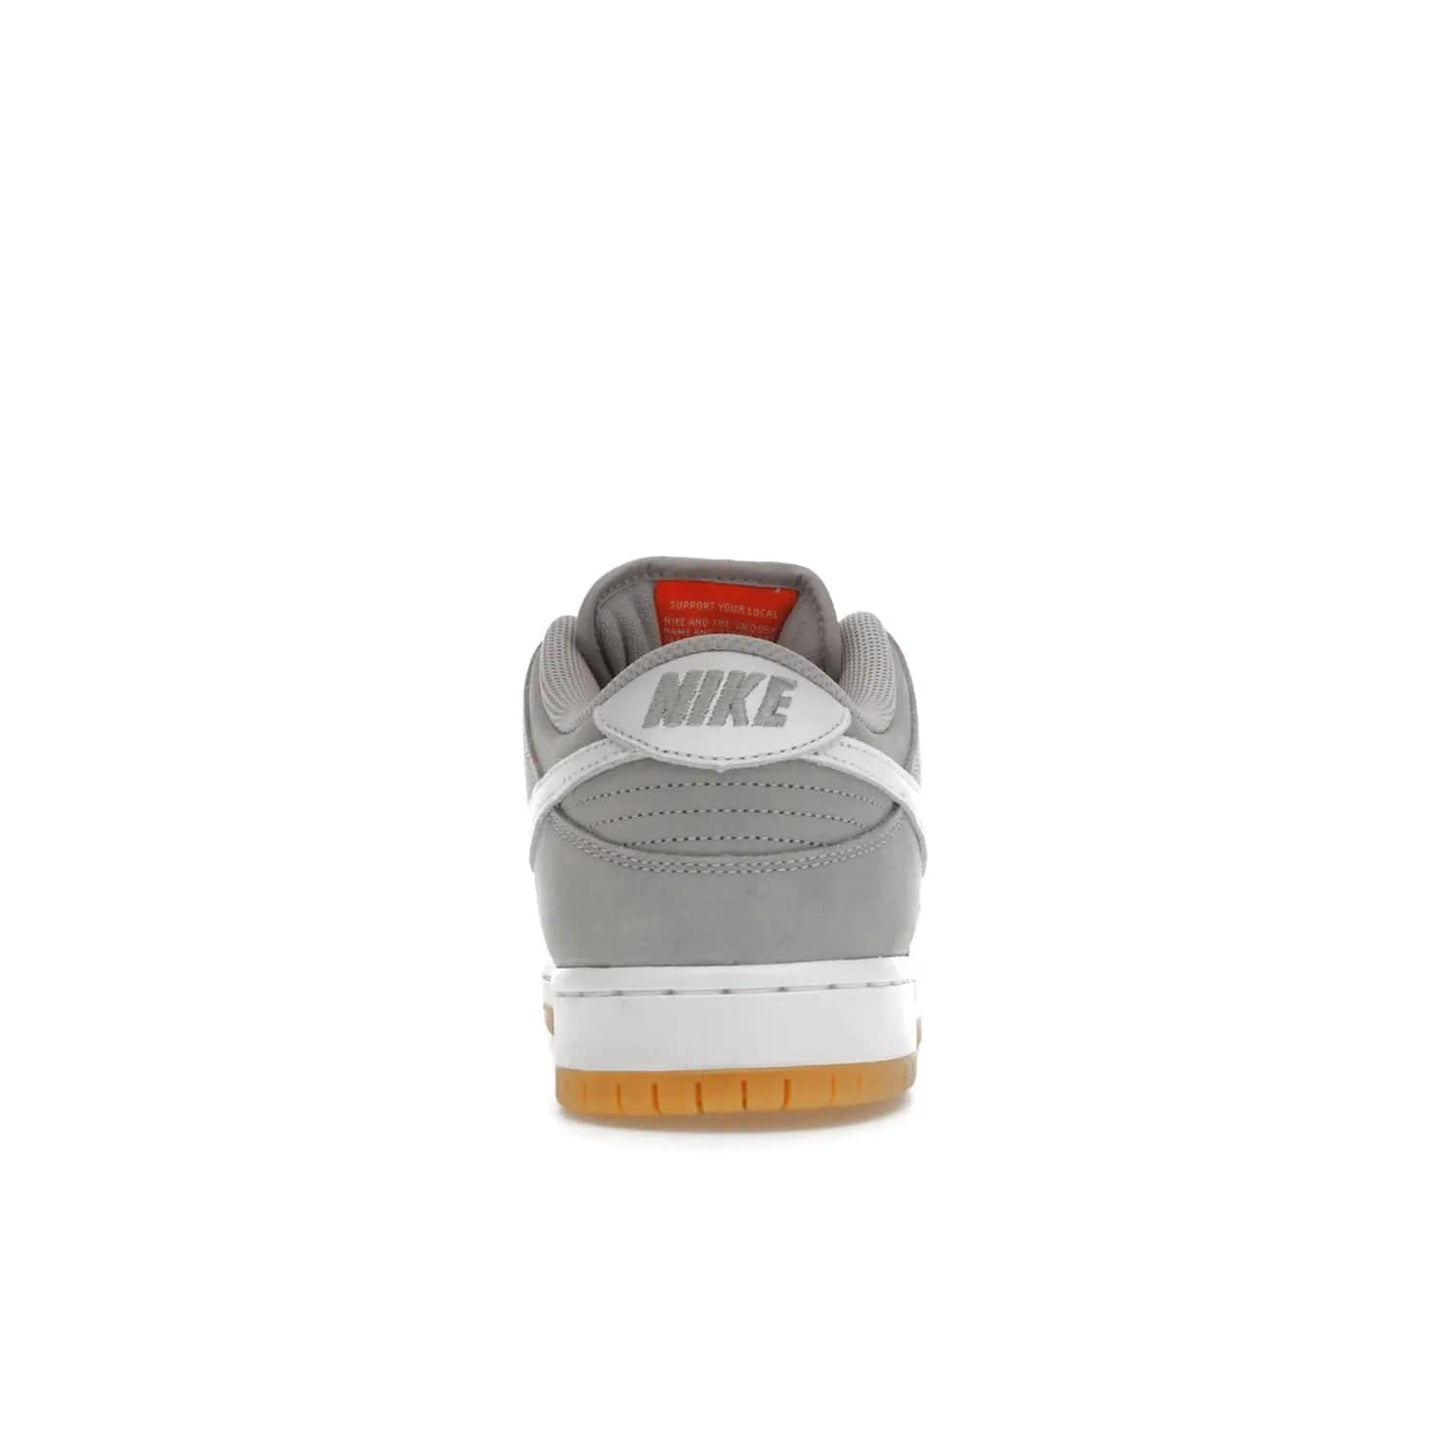 Nike SB Dunk Low Pro ISO Orange Label Wolf Grey Gum - Image 28 - Only at www.BallersClubKickz.com - Introducing Nike's SB Dunk Low Pro ISO Orange Label Wolf Grey Gum - a stylish shoe with a premium Wolf Grey upper, white leather Nike Swoosh, and an eye-catching gum outsole. With special Nike branding and packaging, this shoe adds a unique fashion statement. Out Feb. 24, 2023.